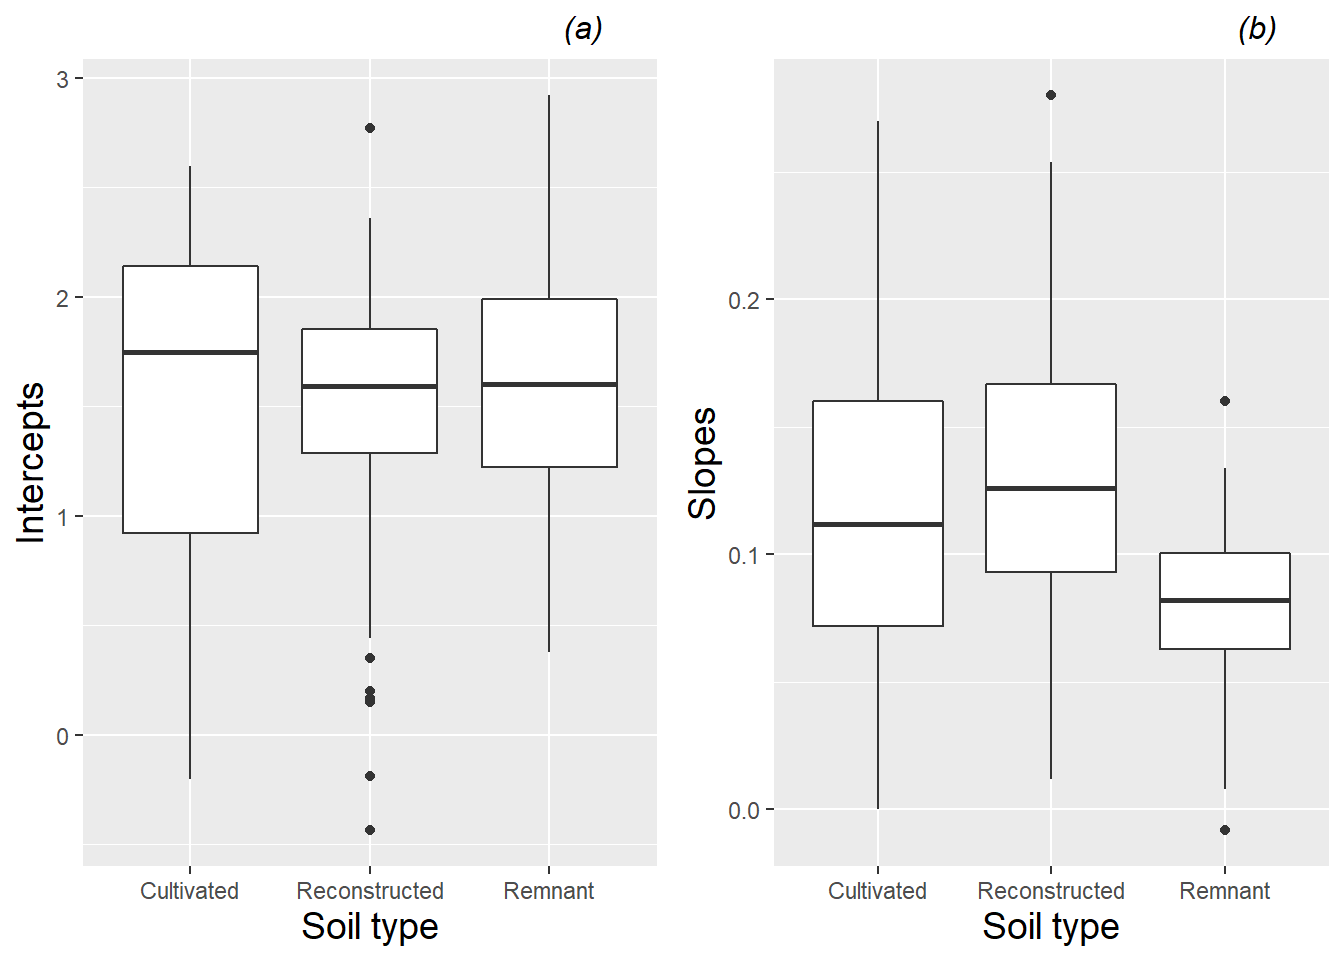 Boxplots of (a) intercepts and (b) slopes for all leadplants by soil type, based on a linear fit to height data from each plant.